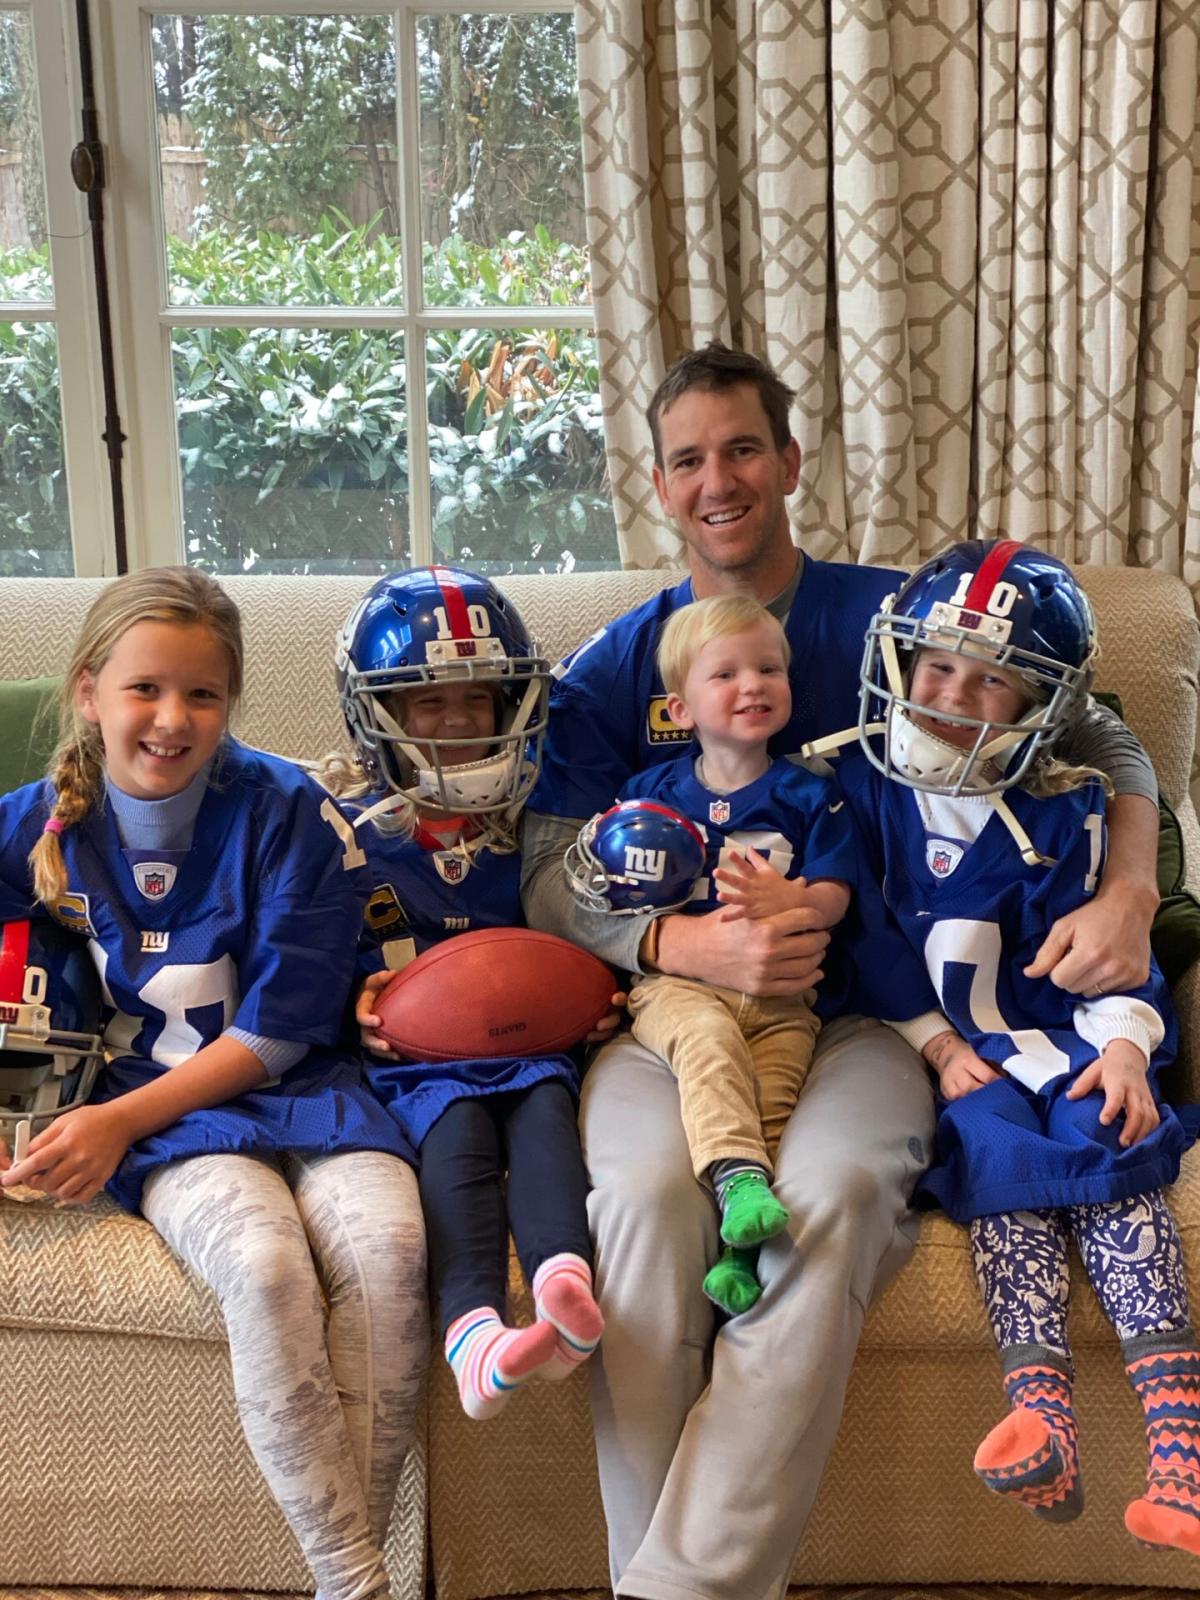 Eli Manning Shares Rare Family Photo with His 4 Kids Dressed for Game